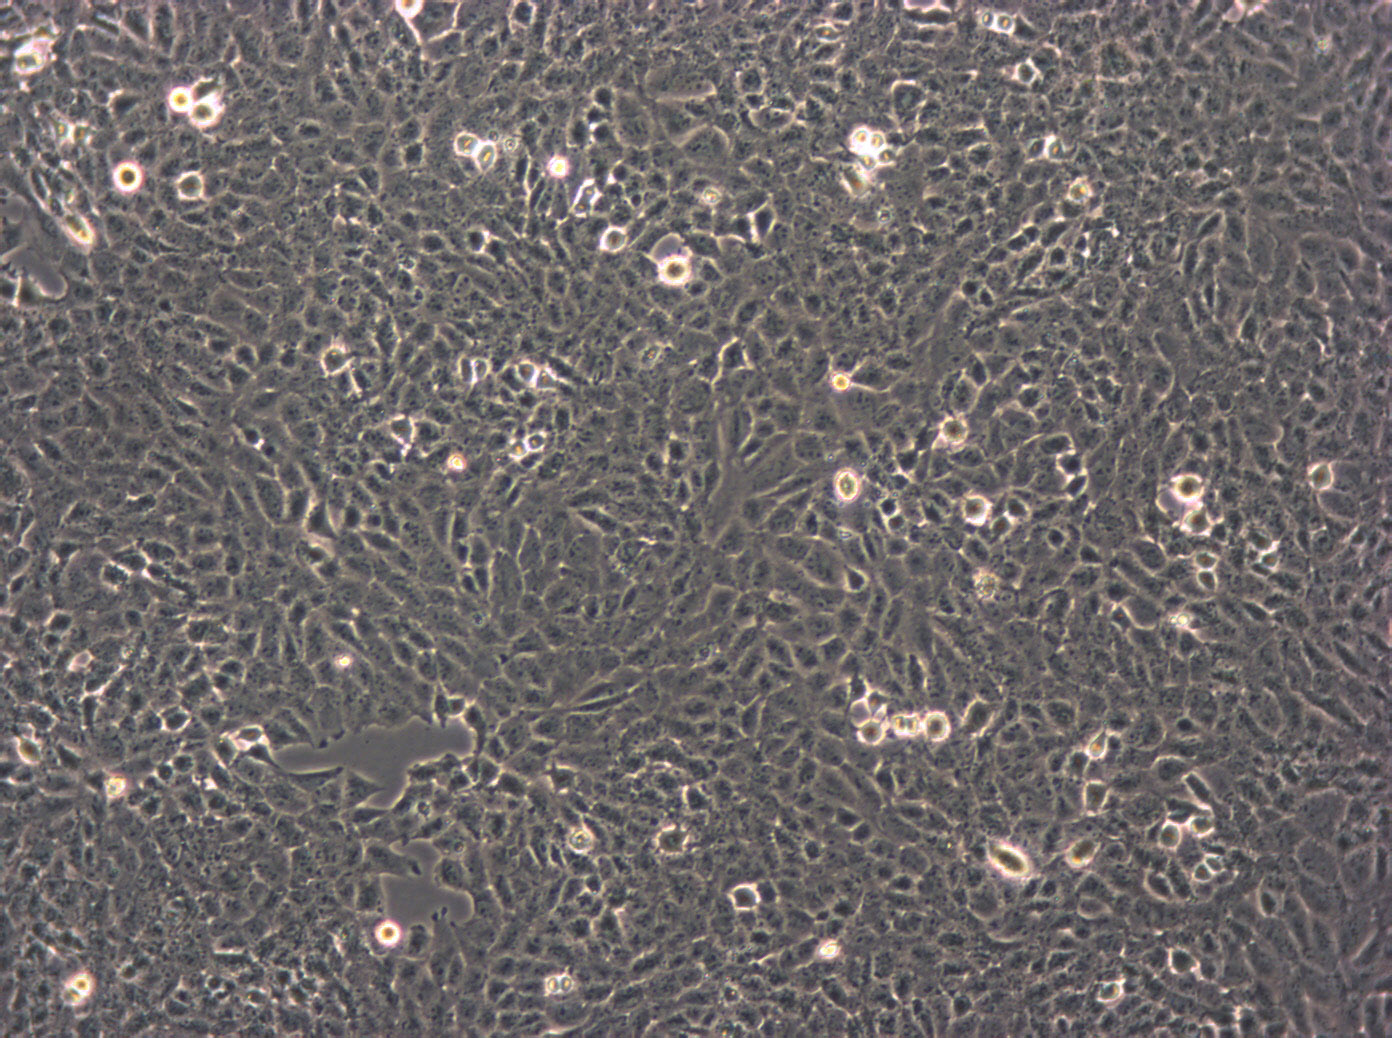 HEC-1-A cell line人子宫内膜癌细胞系,HEC-1-A cell